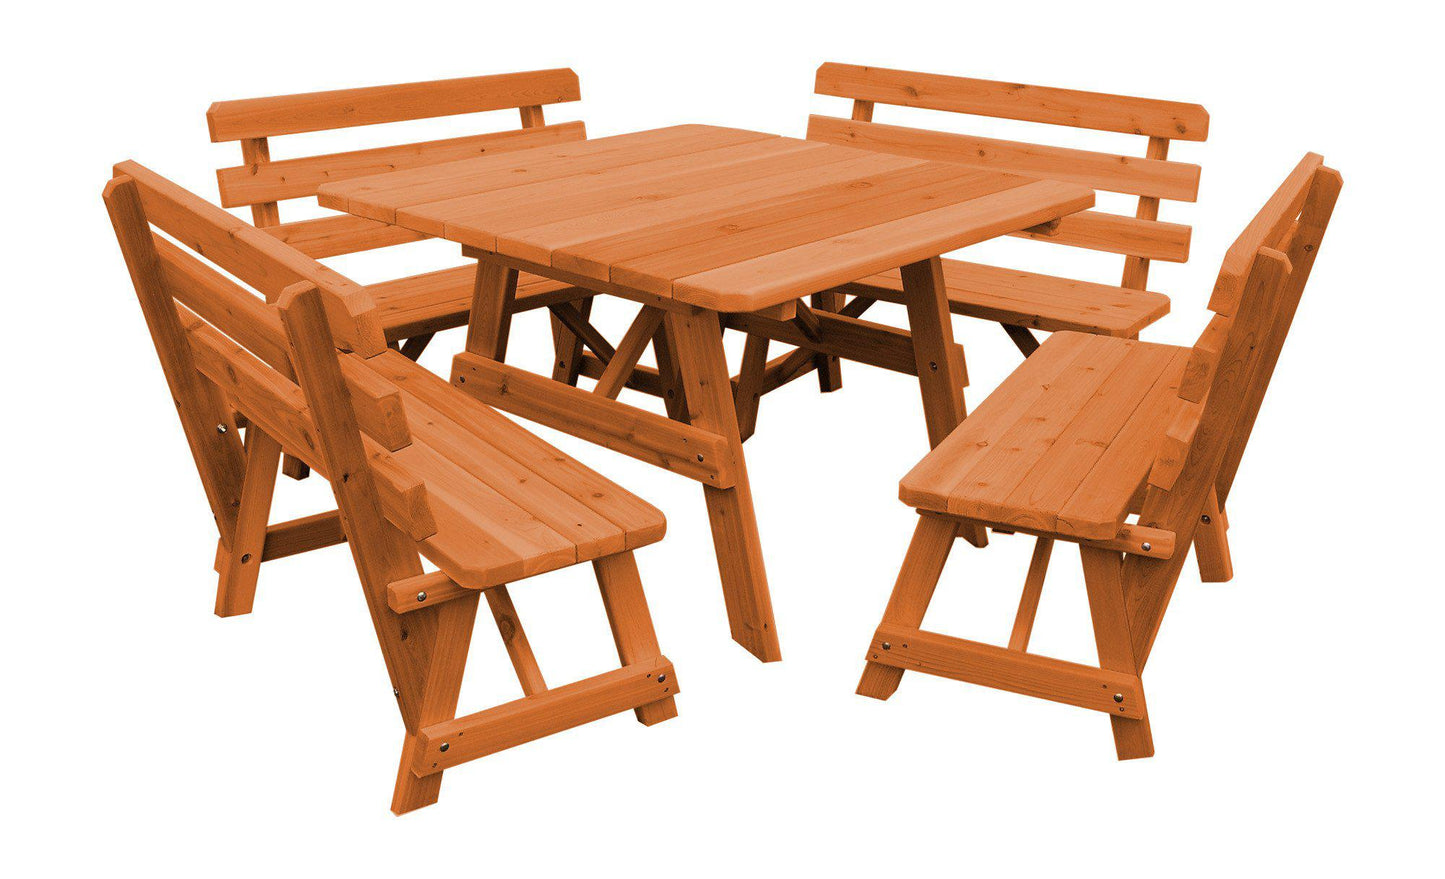 A&L FURNITURE CO. Western Red Cedar 43" Square Table w/ 4 Backed Benches- Specify for FREE 2" Umbrella Hole - LEAD TIME TO SHIP 4 WEEKS OR LESS